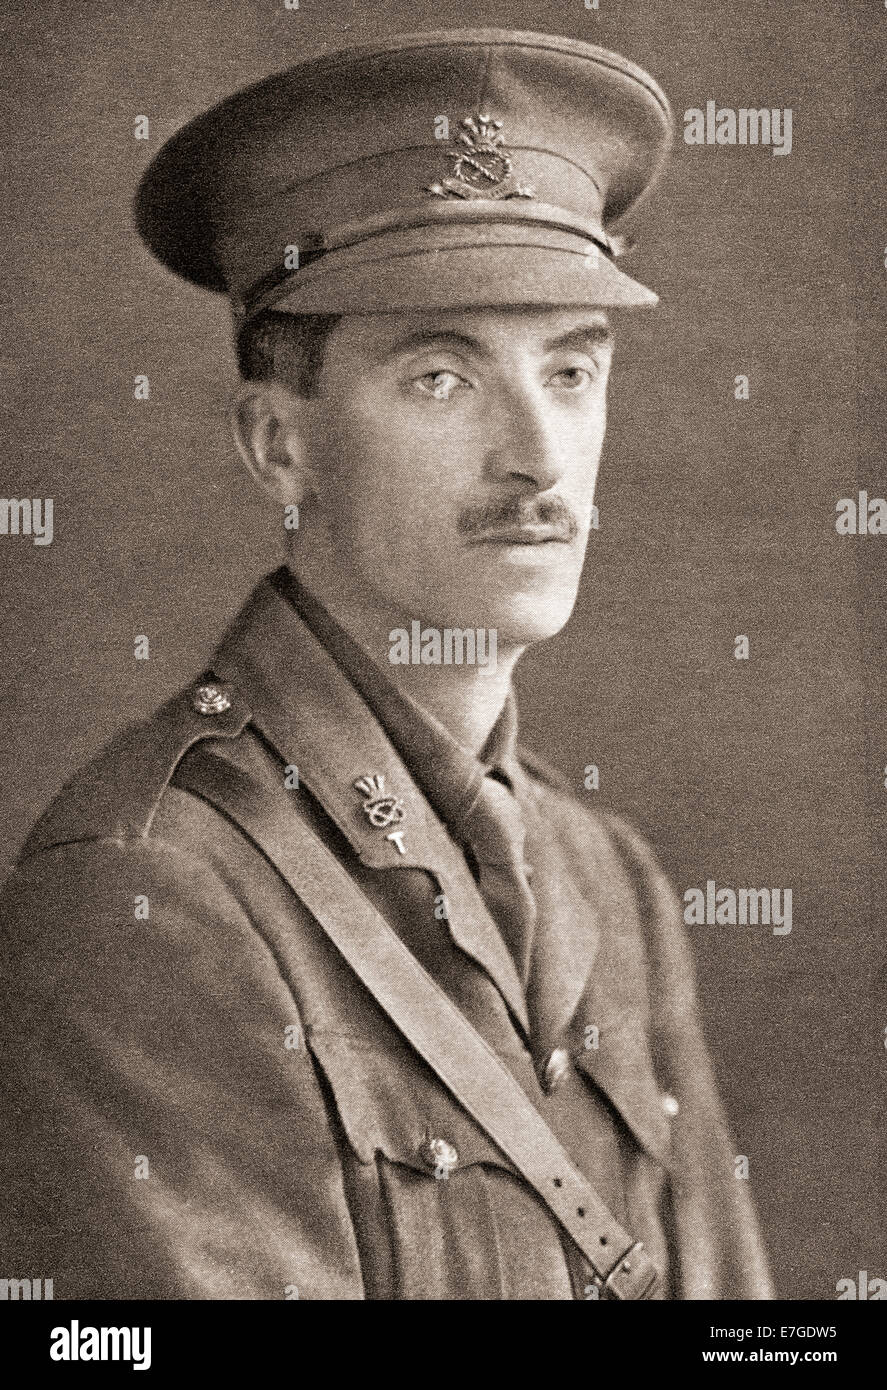 Captain Charles John Beech Masefield, 1882-1917.  English soldier, author and poet. Stock Photo